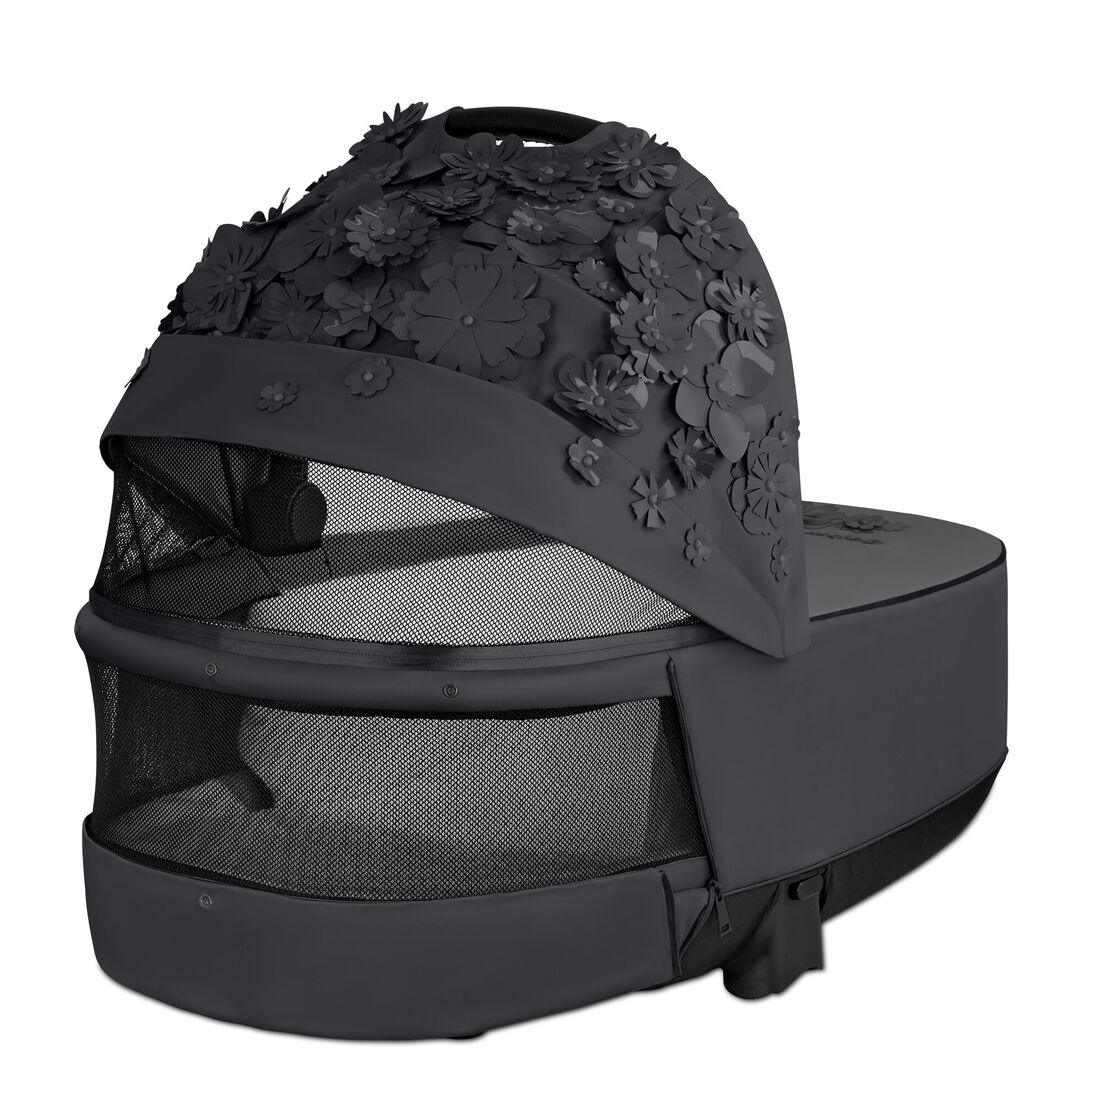 CYBEX Priam 3 Lux Carry Cot - Dream Grey in Dream Grey large image number 4